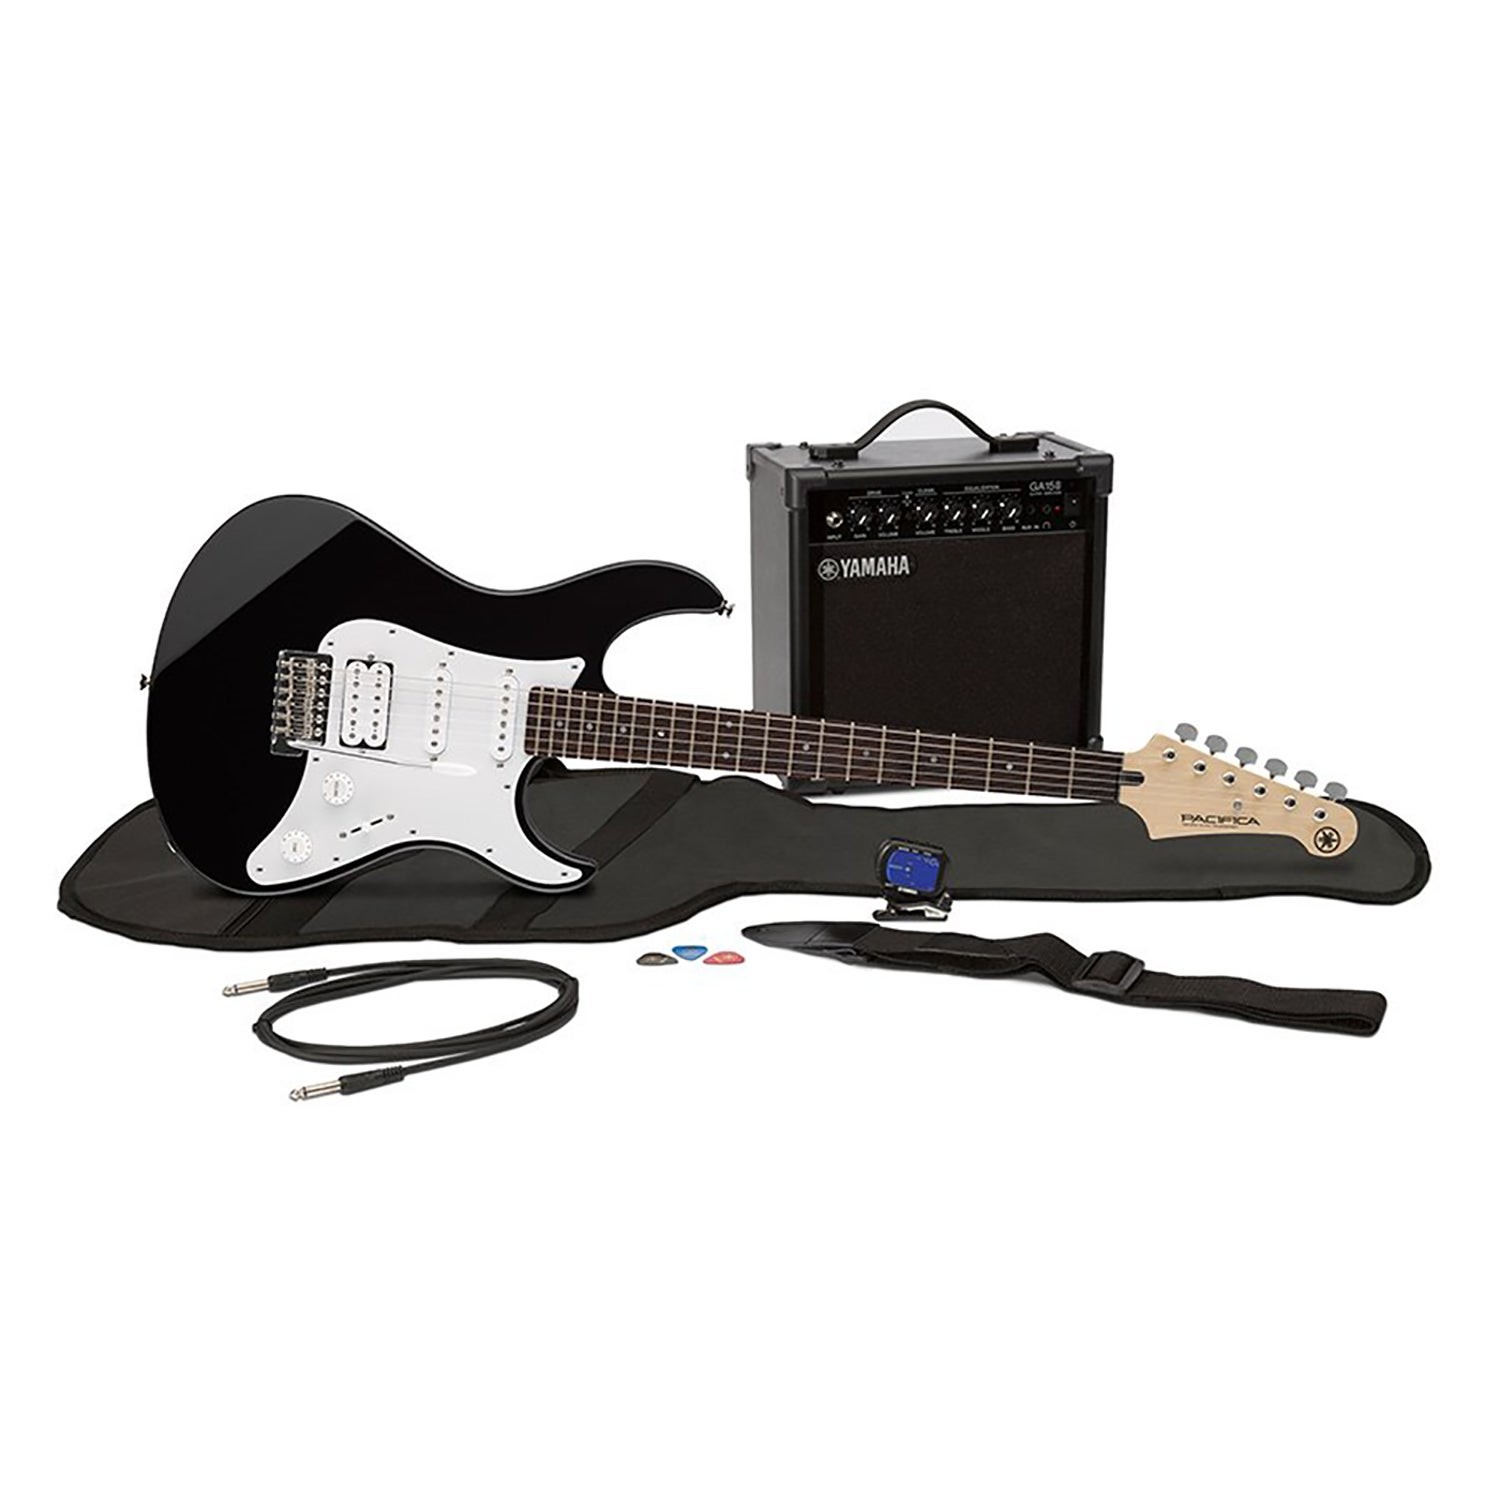 Gigmaker Electric Guitar PAC012 w/ Amp Guitar Package Black